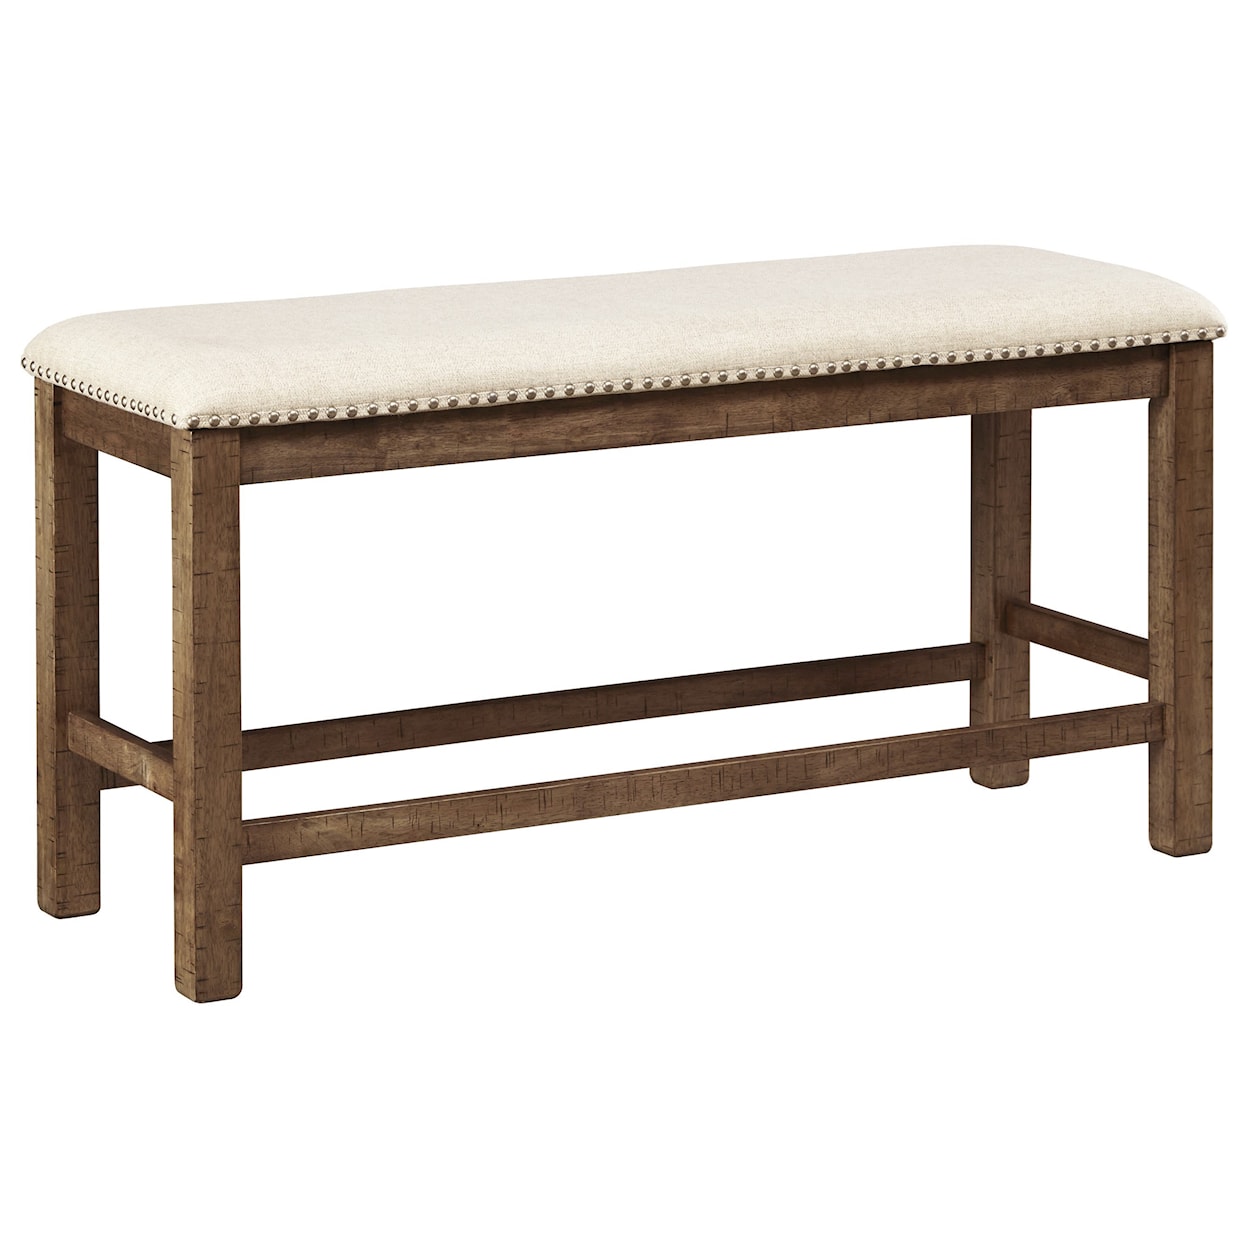 Signature Design Moriville Double Upholstered Bench